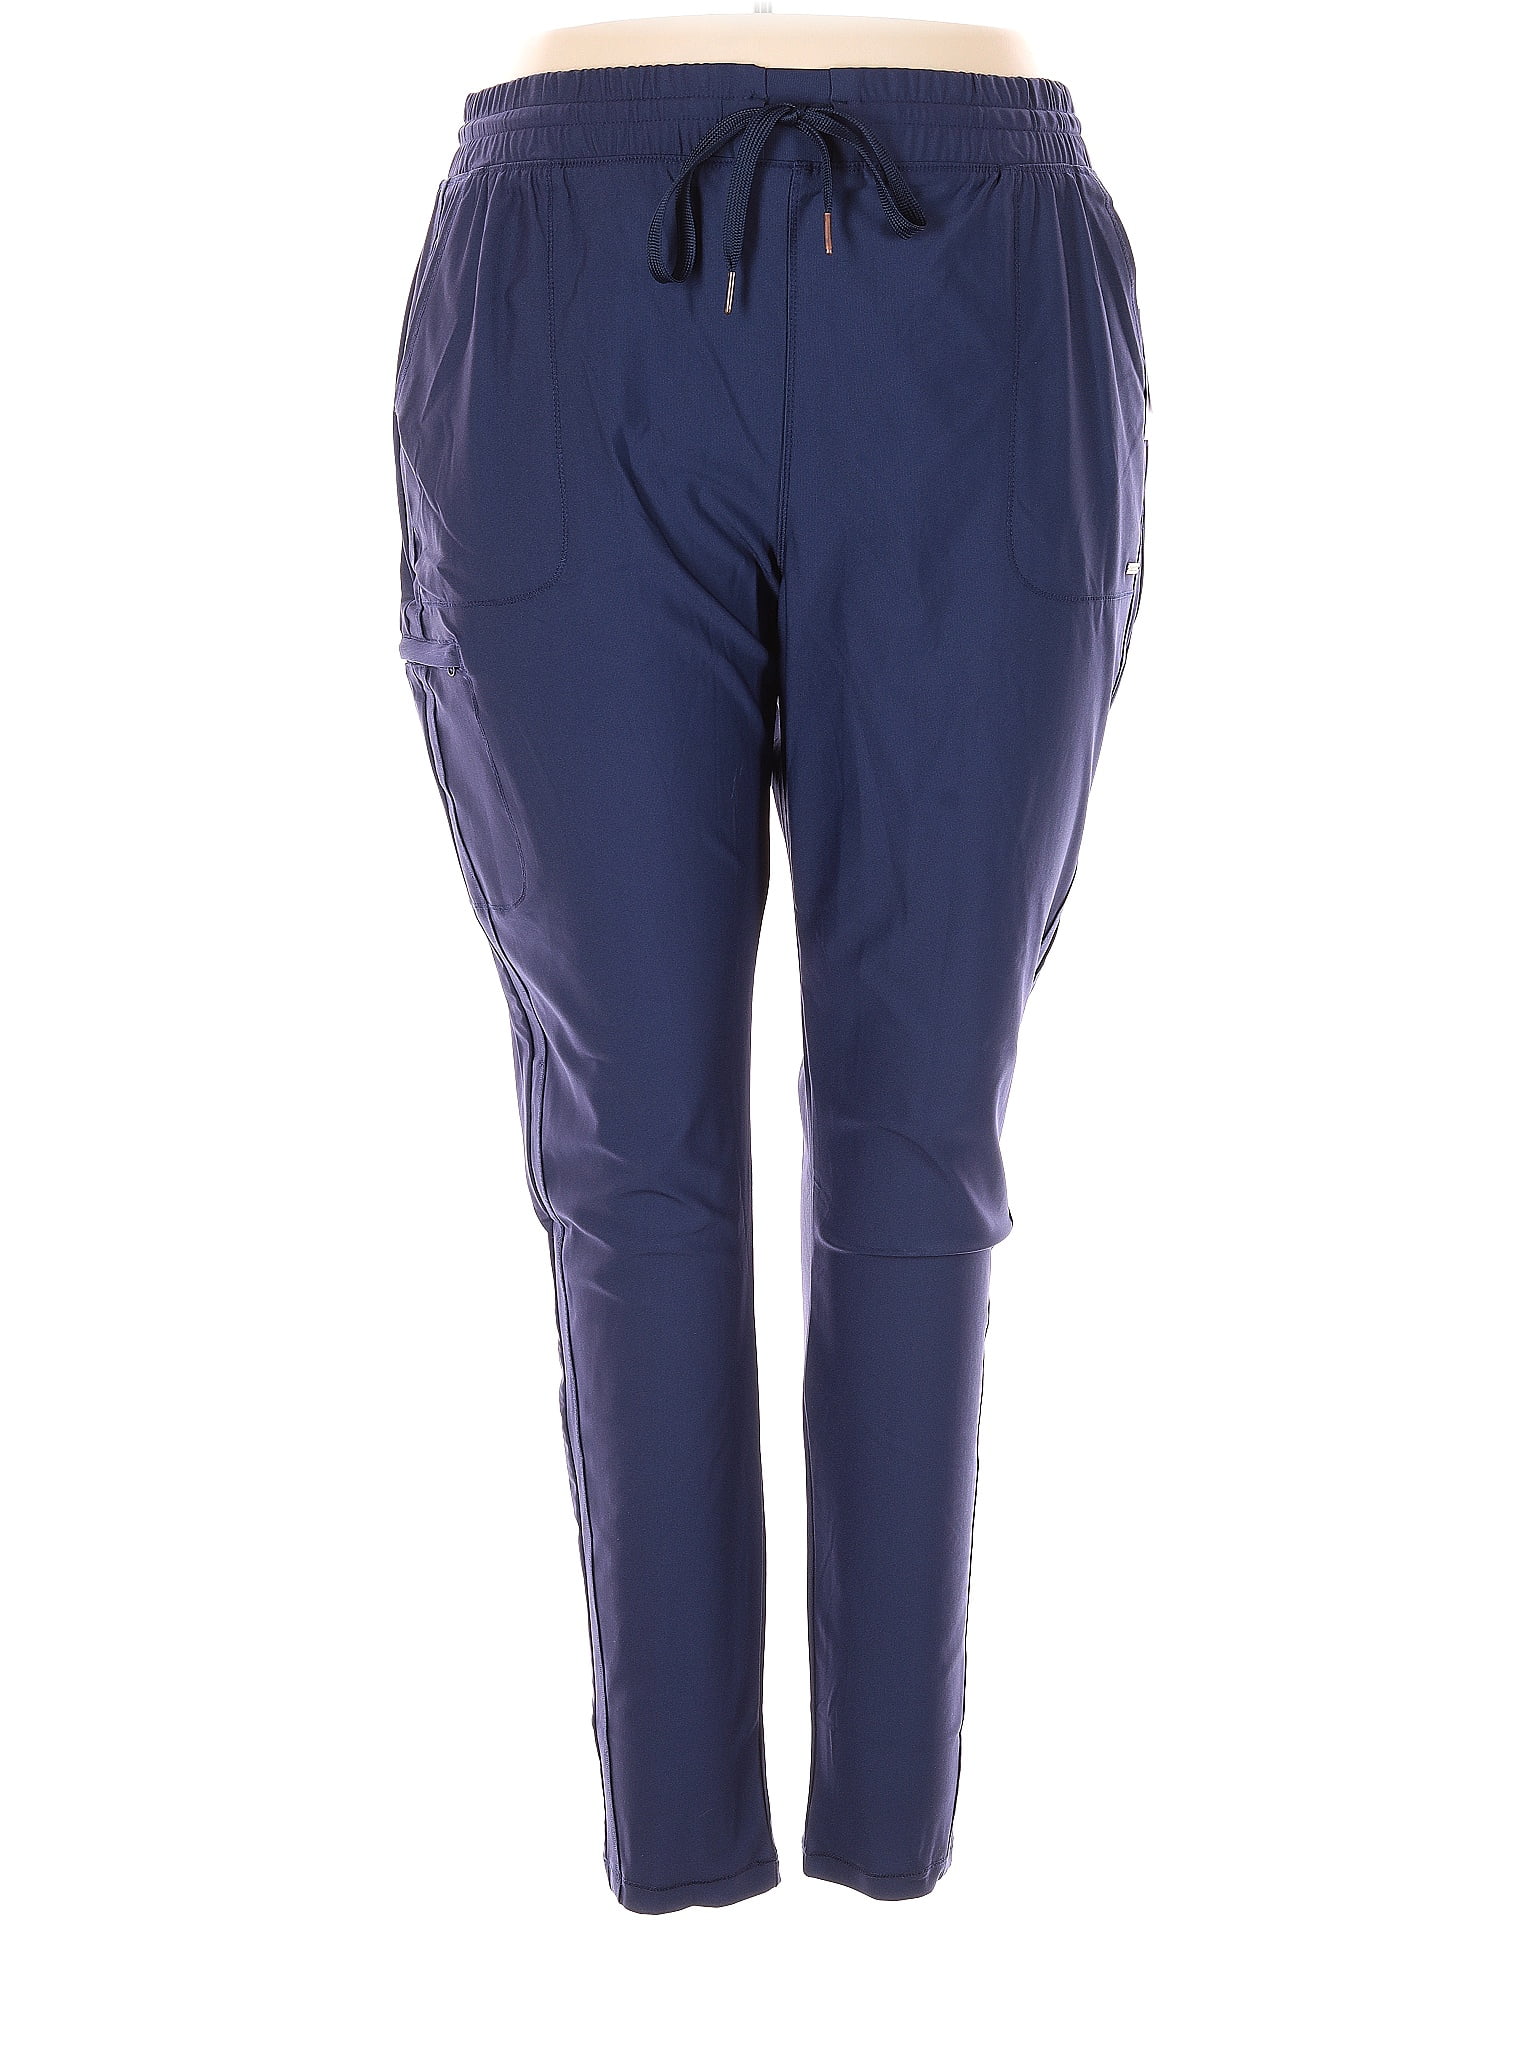 Cherokee Solid Blue Active Pants Size 2X (Plus) - 21% off